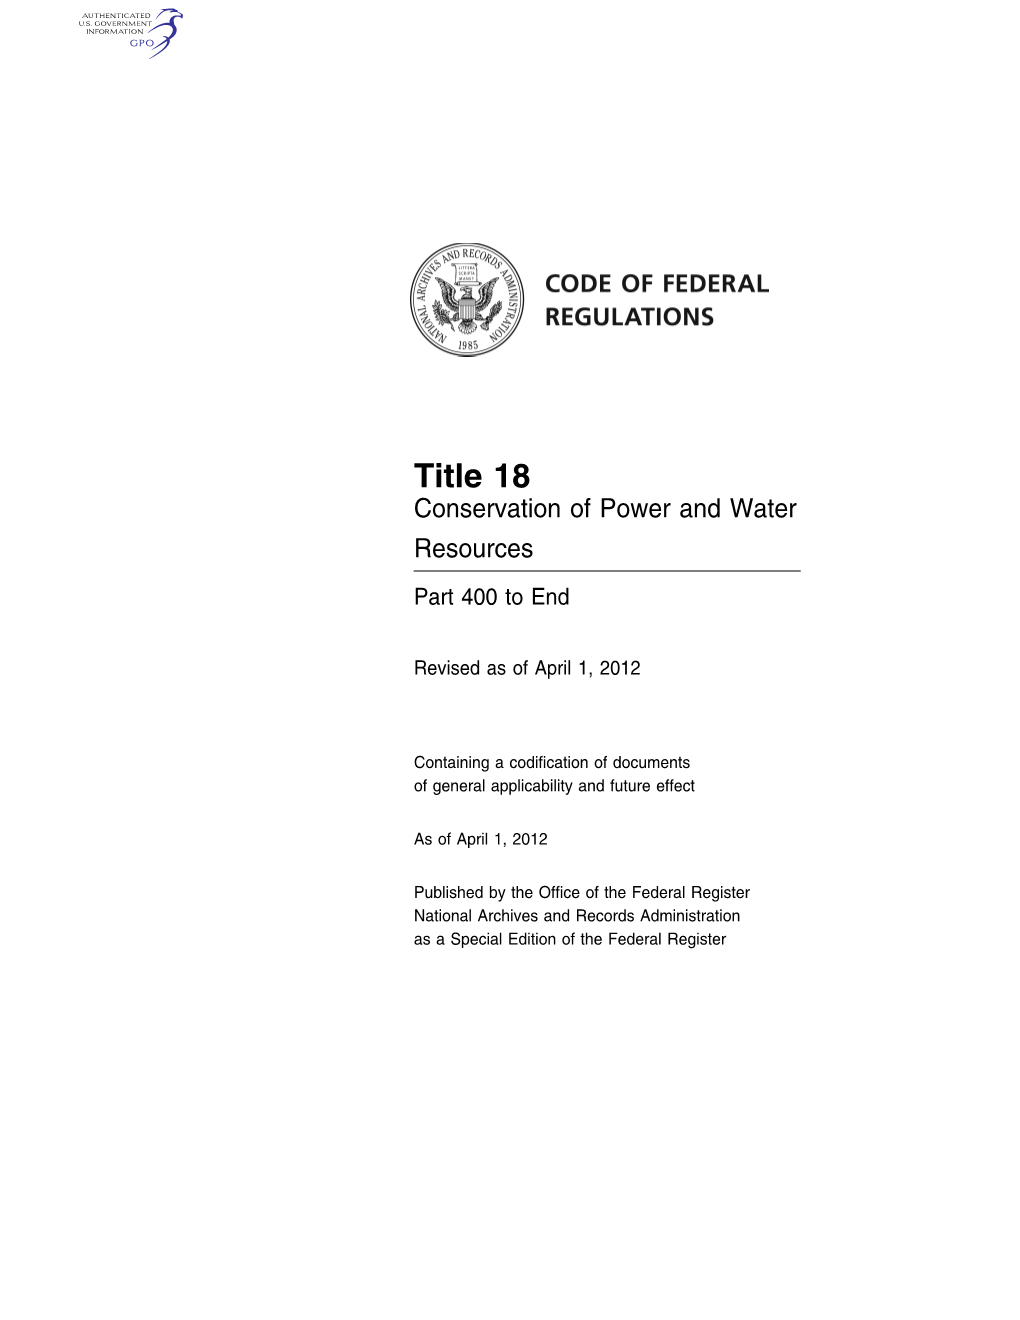 Title 18 Conservation of Power and Water Resources Part 400 to End